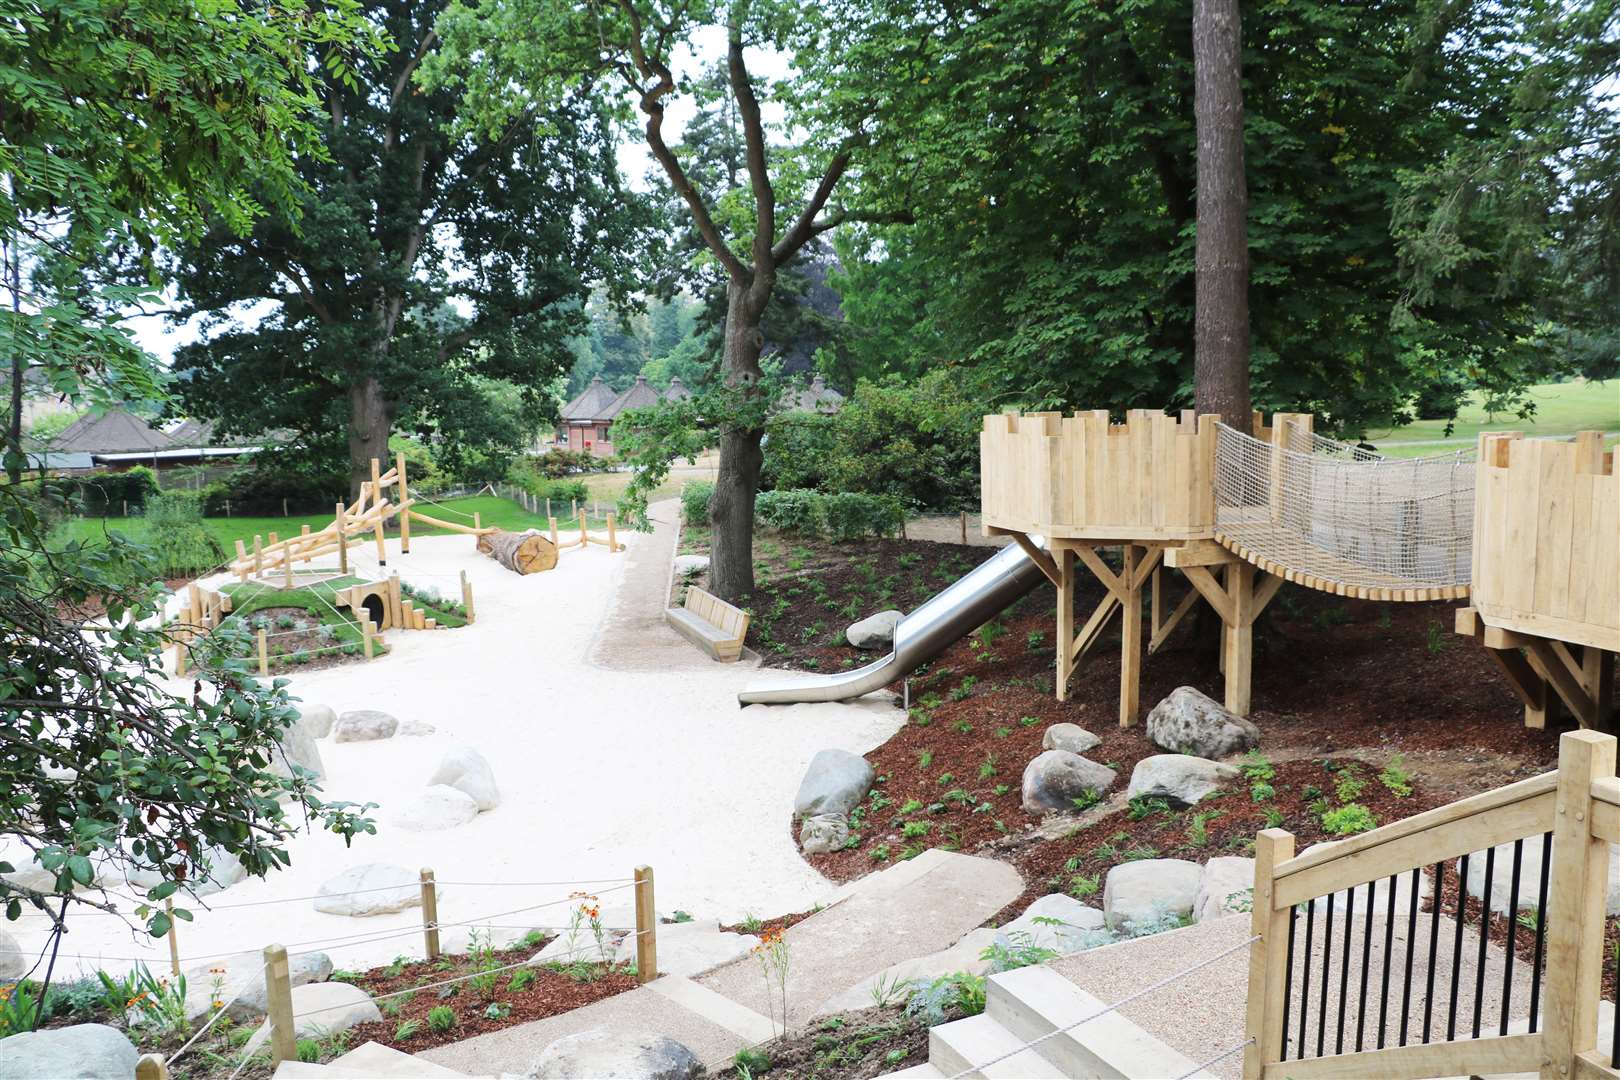 Acorn Dell has opened in time for the school summer break